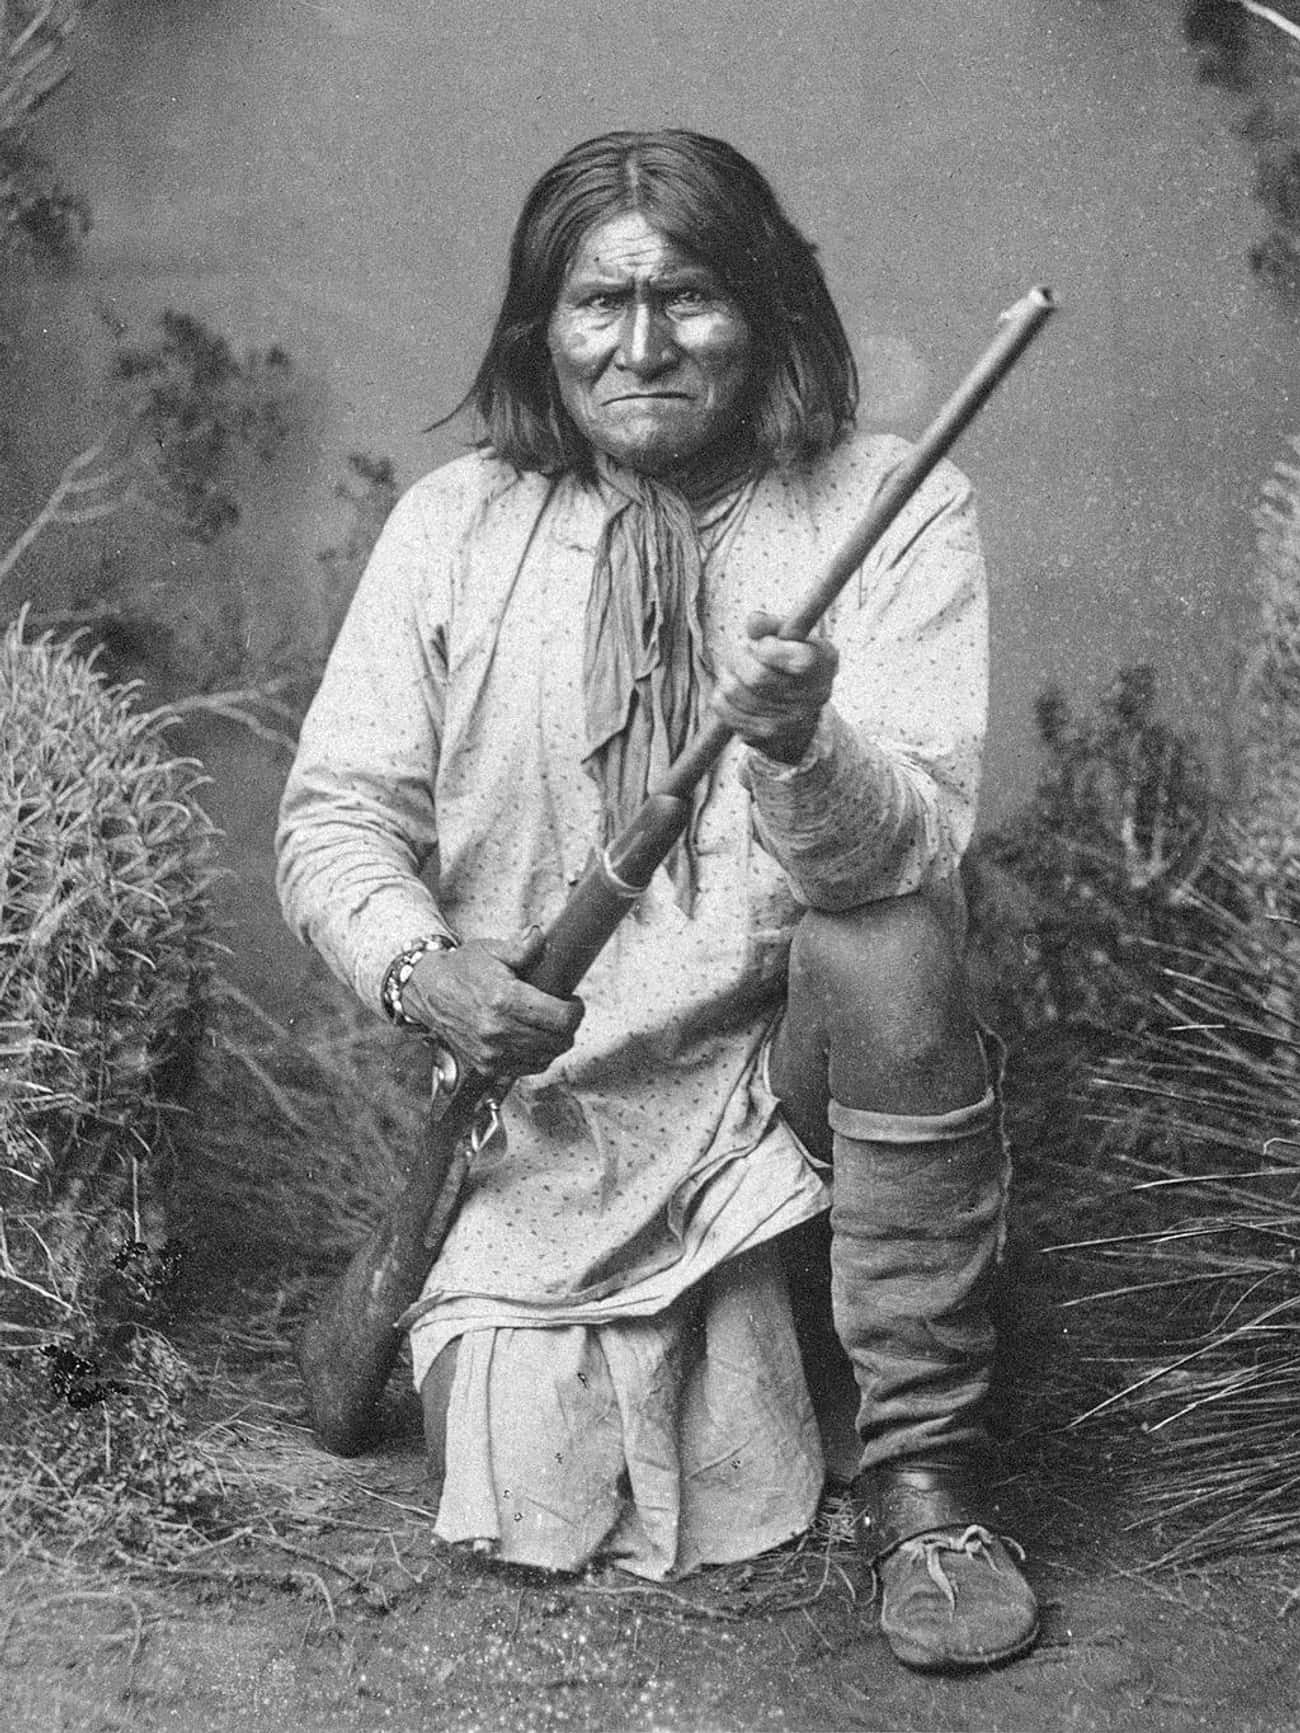 Geronimo Ran At Soldiers In A Zigzag Pattern Until He Got Close Enough To Use His Knife